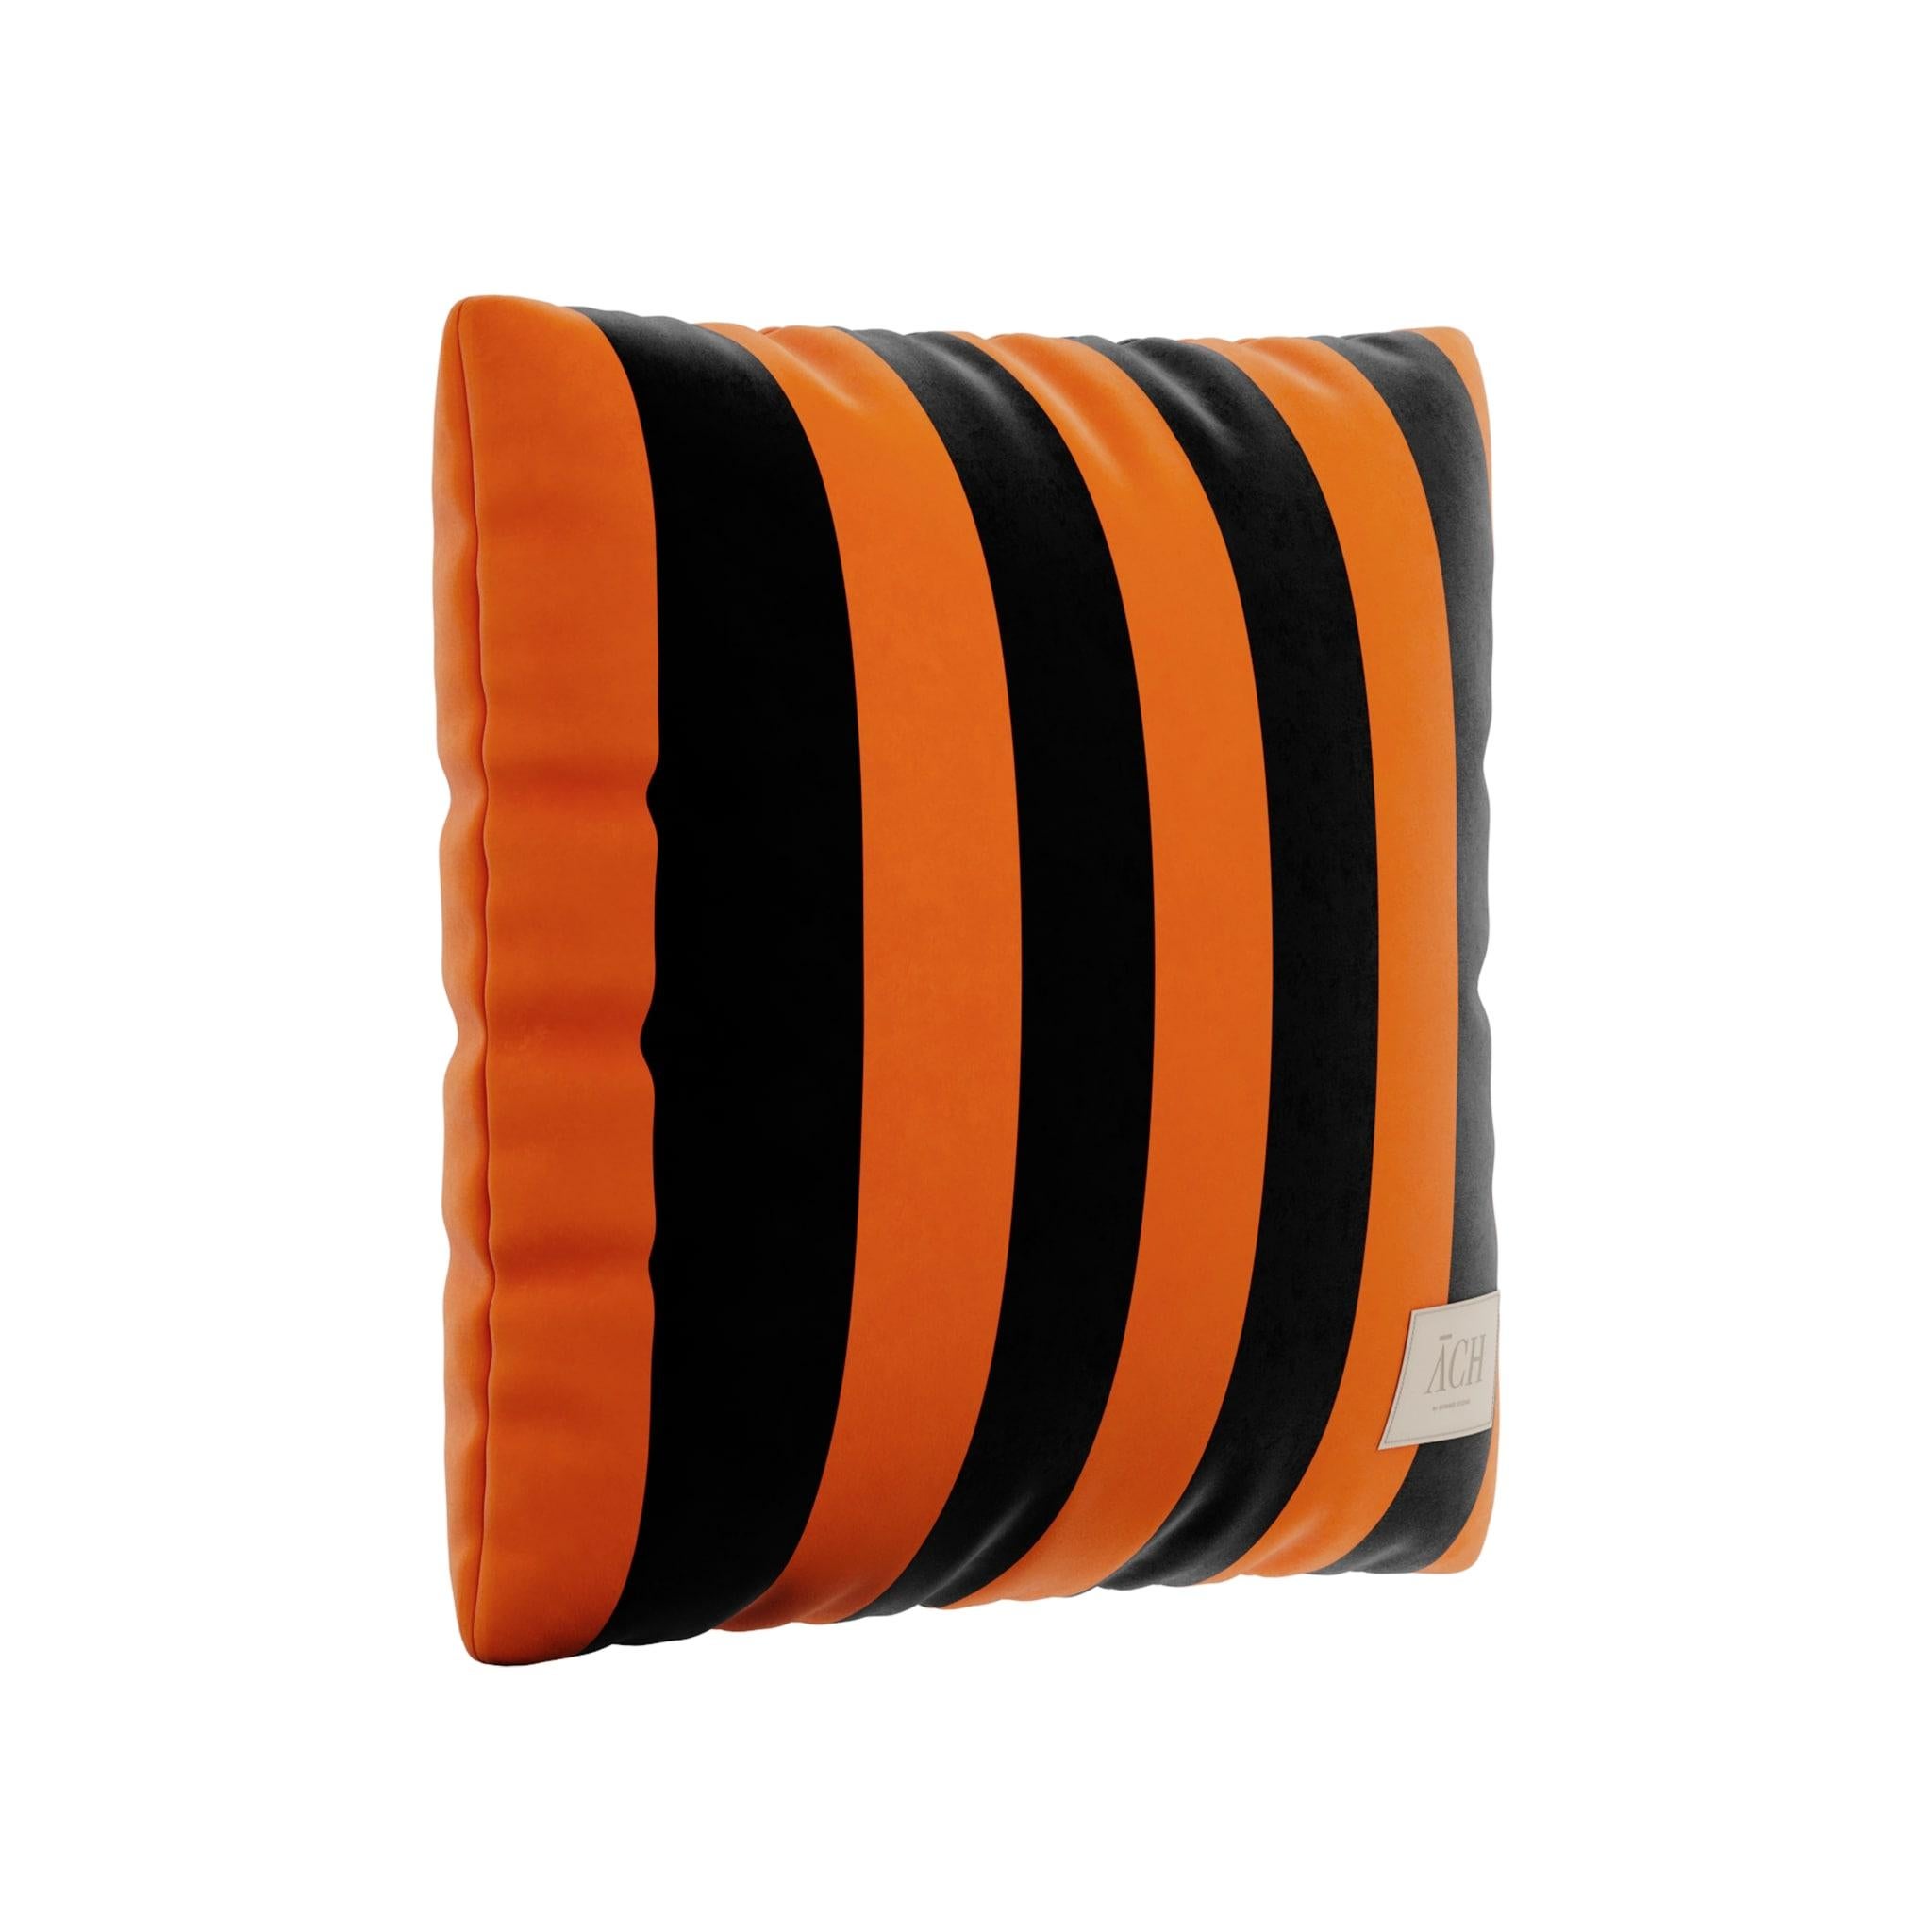 Portuguese Black Orange Square Pillow, Modern Velvet Cushion with Playful and Zingy Pattern